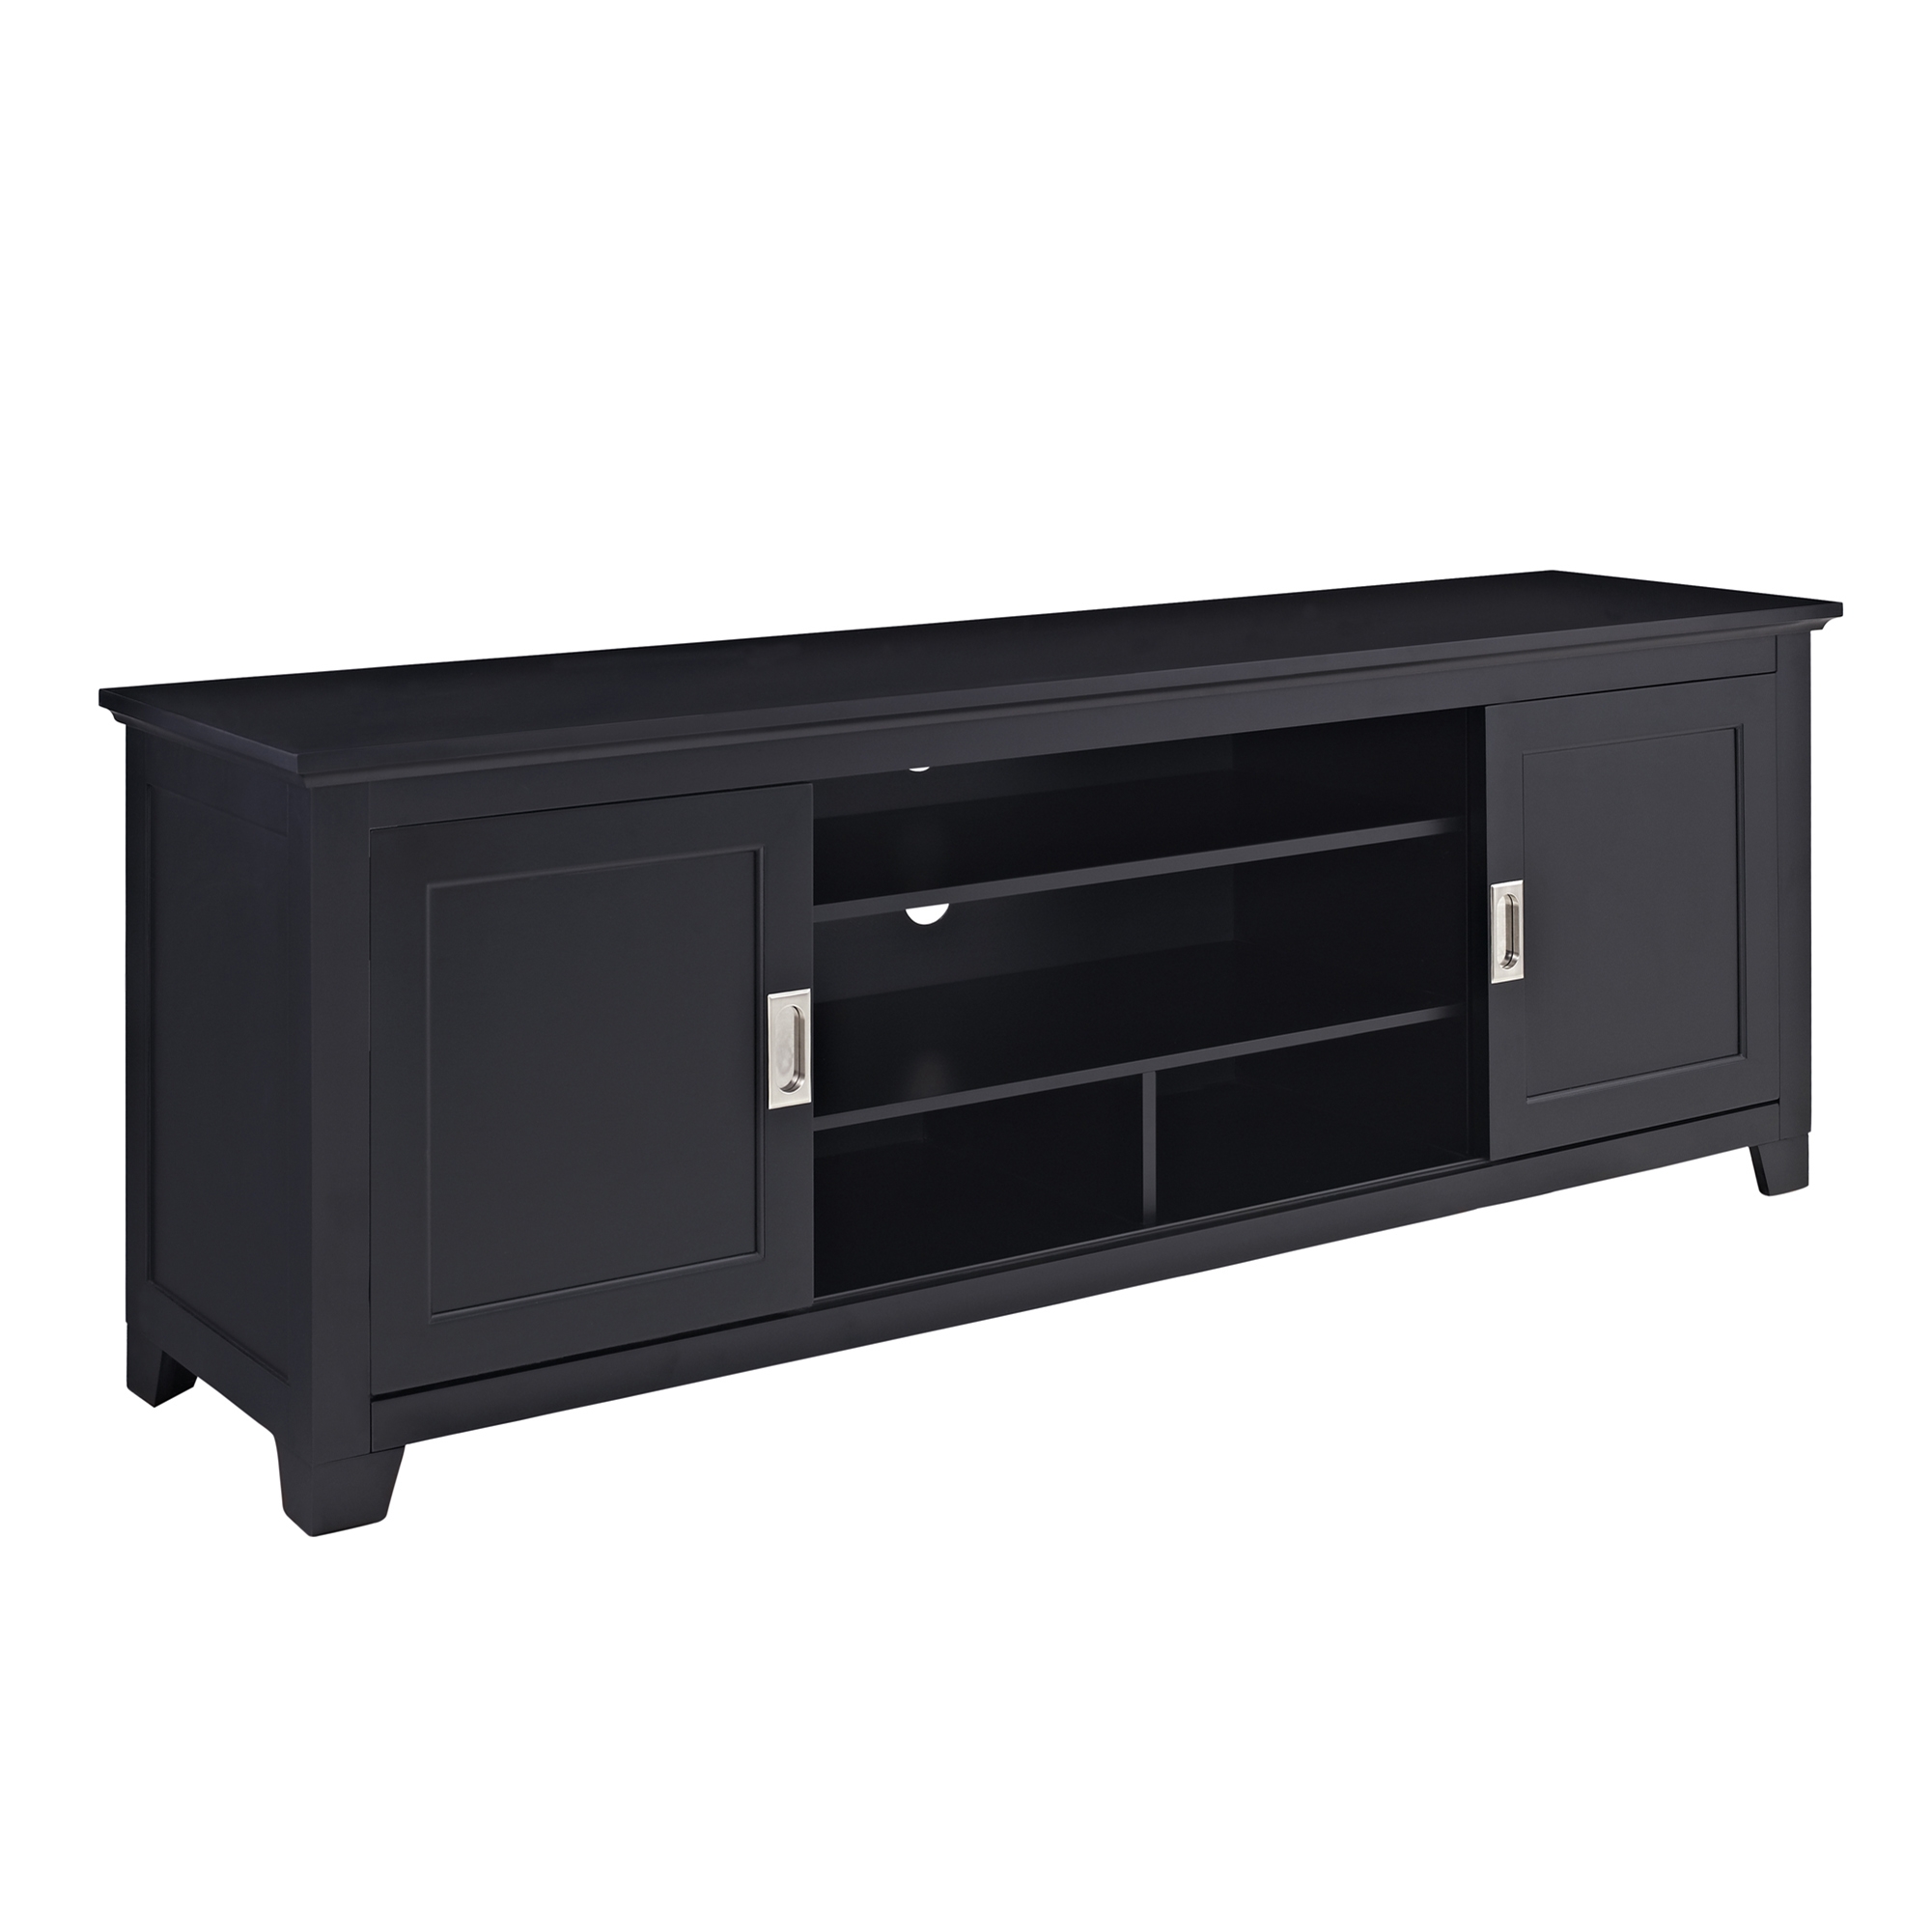 Fullview 70" Traditional Wood TV Stand - Black - Image 1